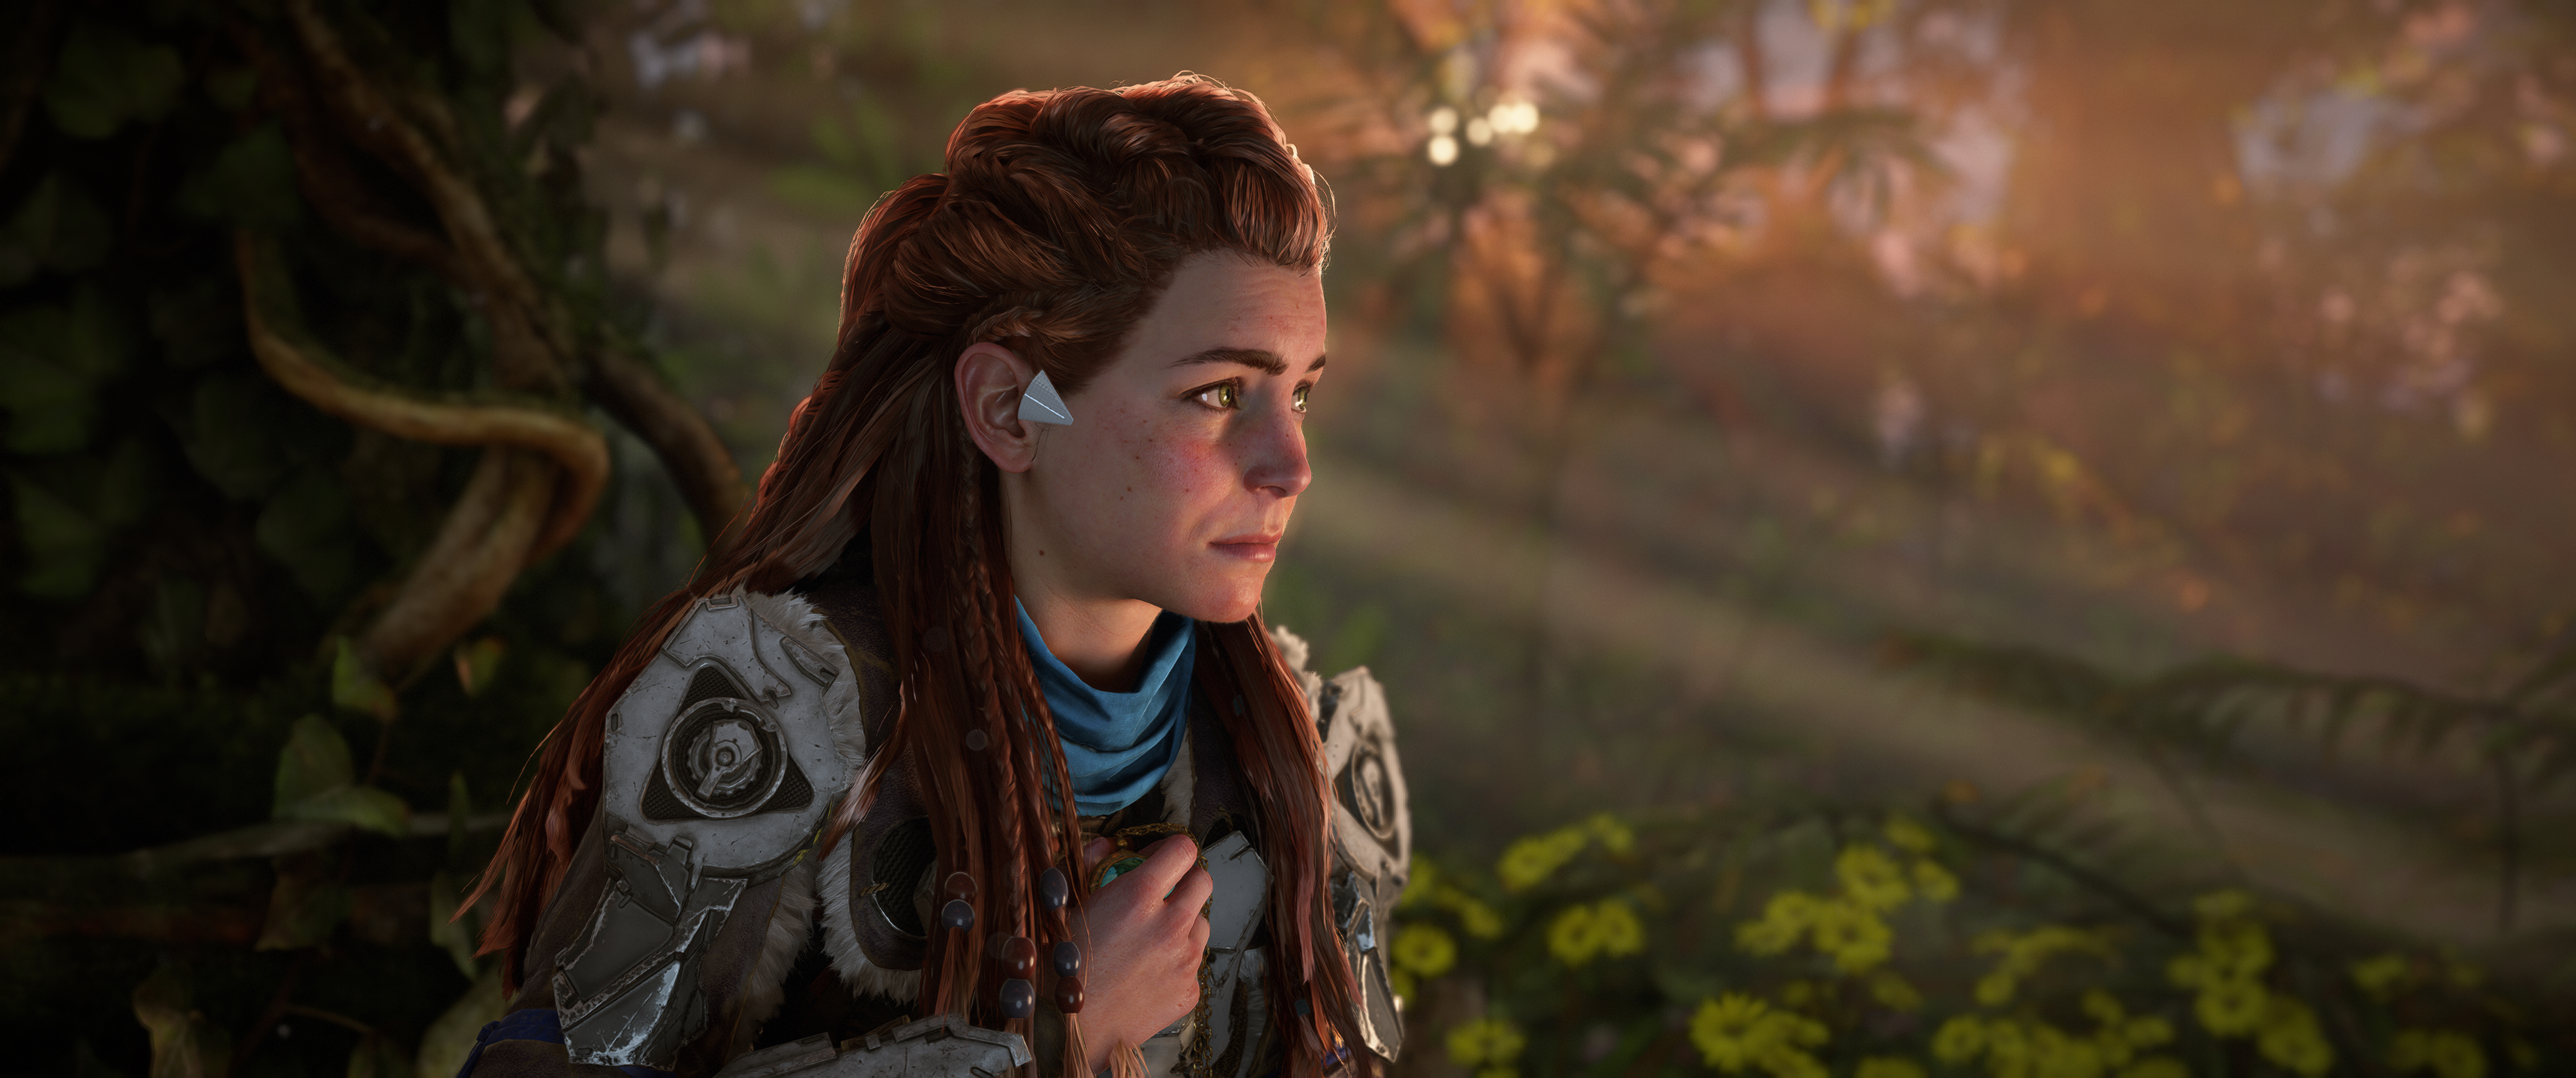 General 3440x1440 video games Horizon Forbidden West screen shot redhead PC gaming Aloy video game characters CGI video game girls sunlight video game art long hair plants looking away blurry background